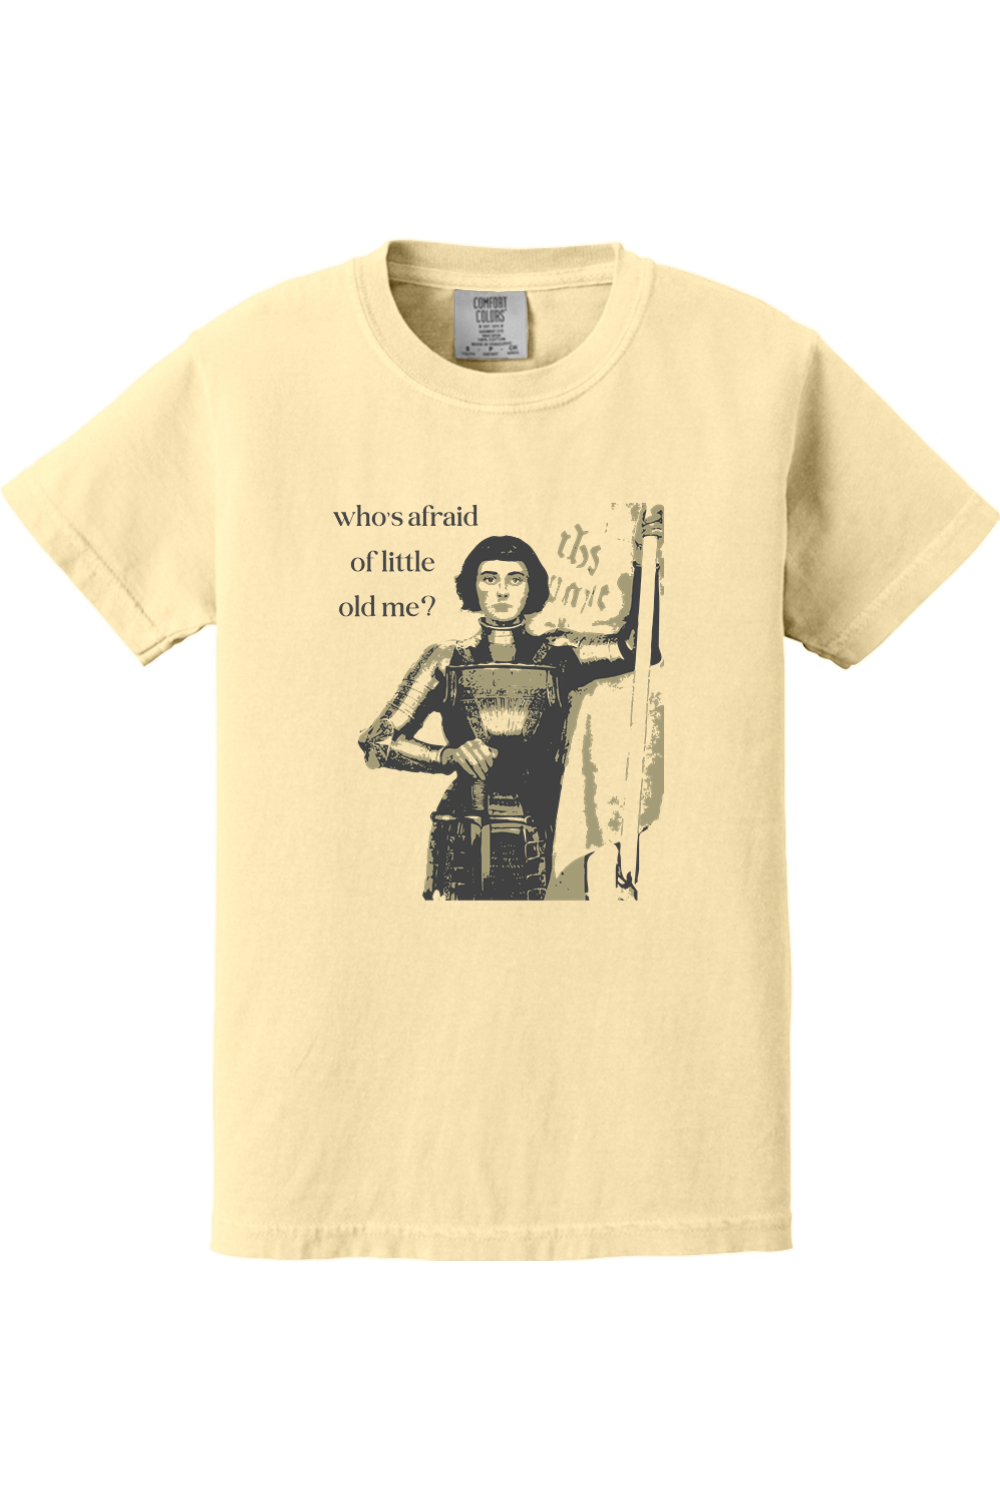 Who's Afraid of Little Old Me? - St. Joan of Arc Youth T-shirt - Comfort Colors